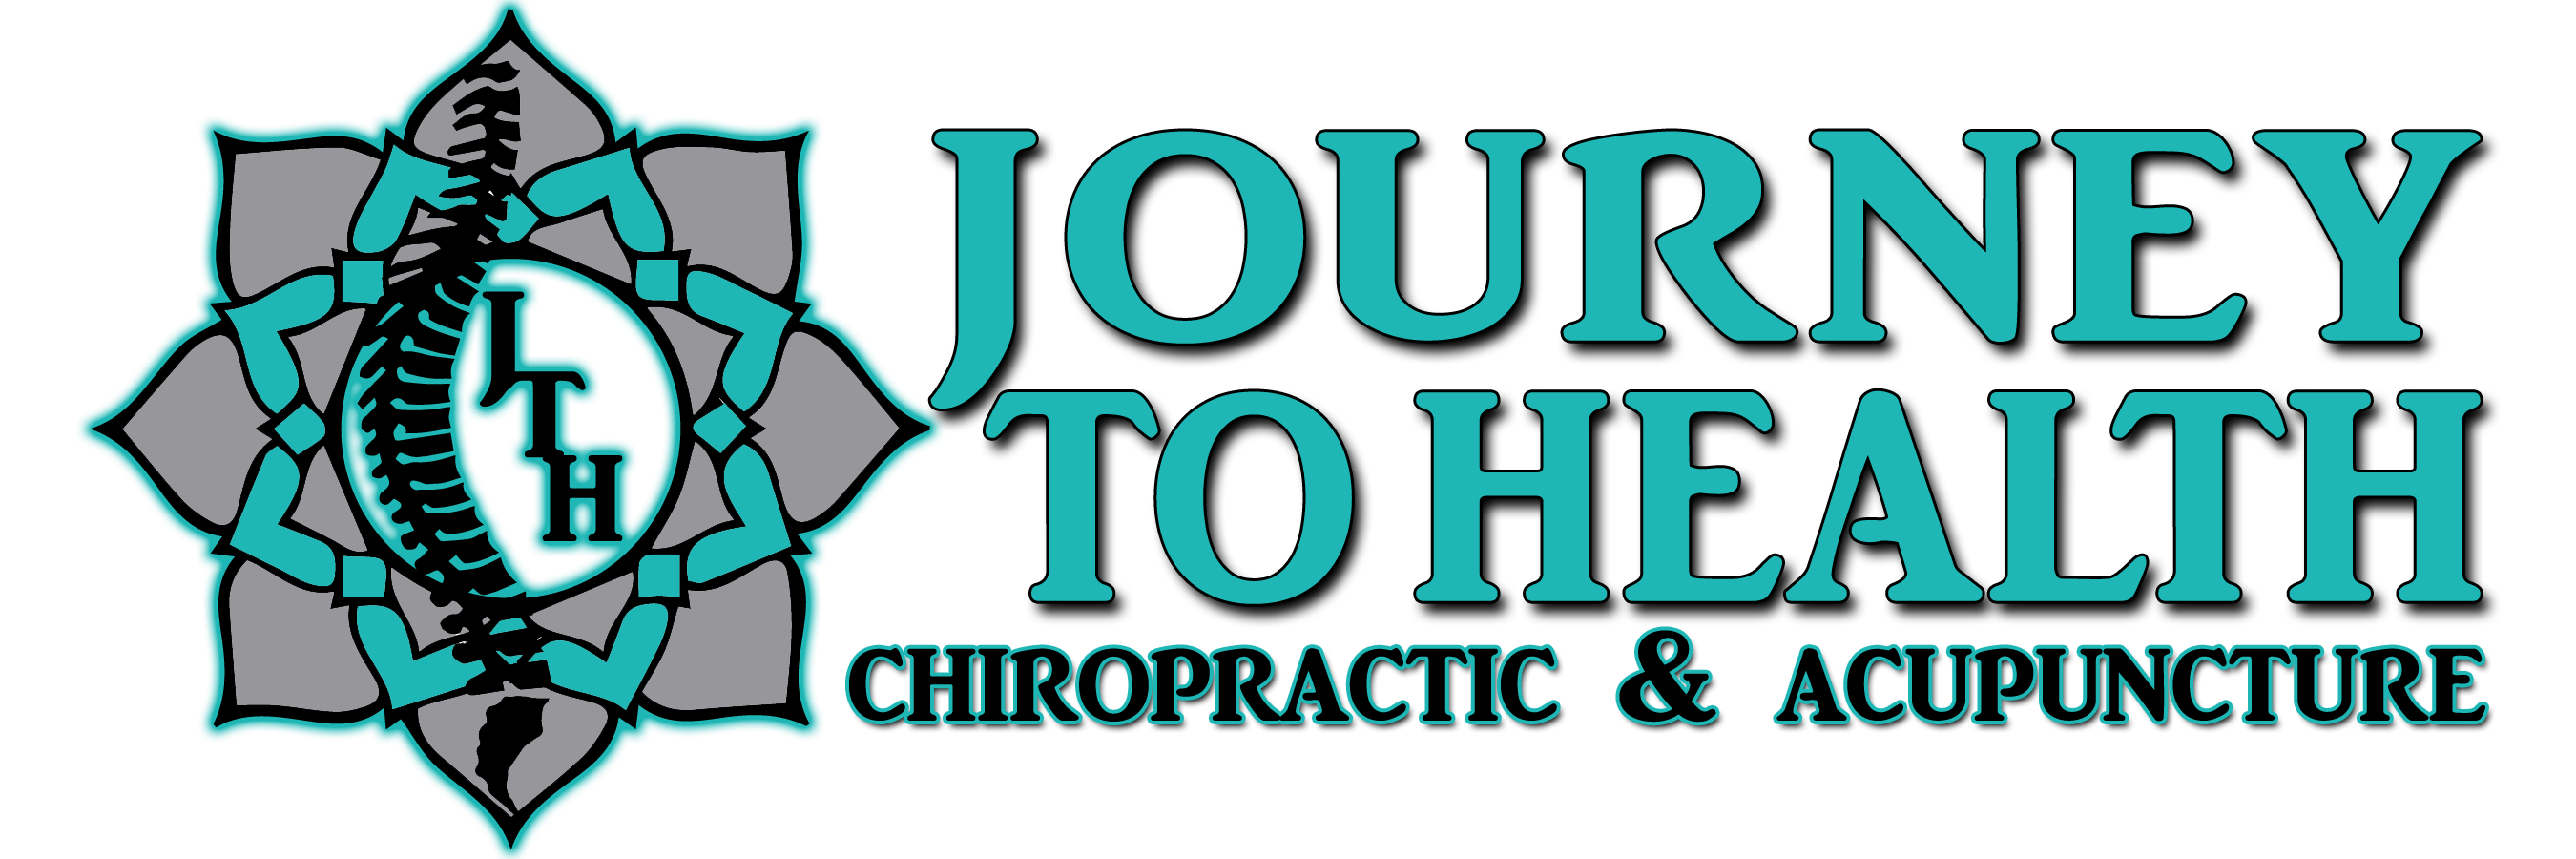 Journey to Health Chiropractic & Acupuncture